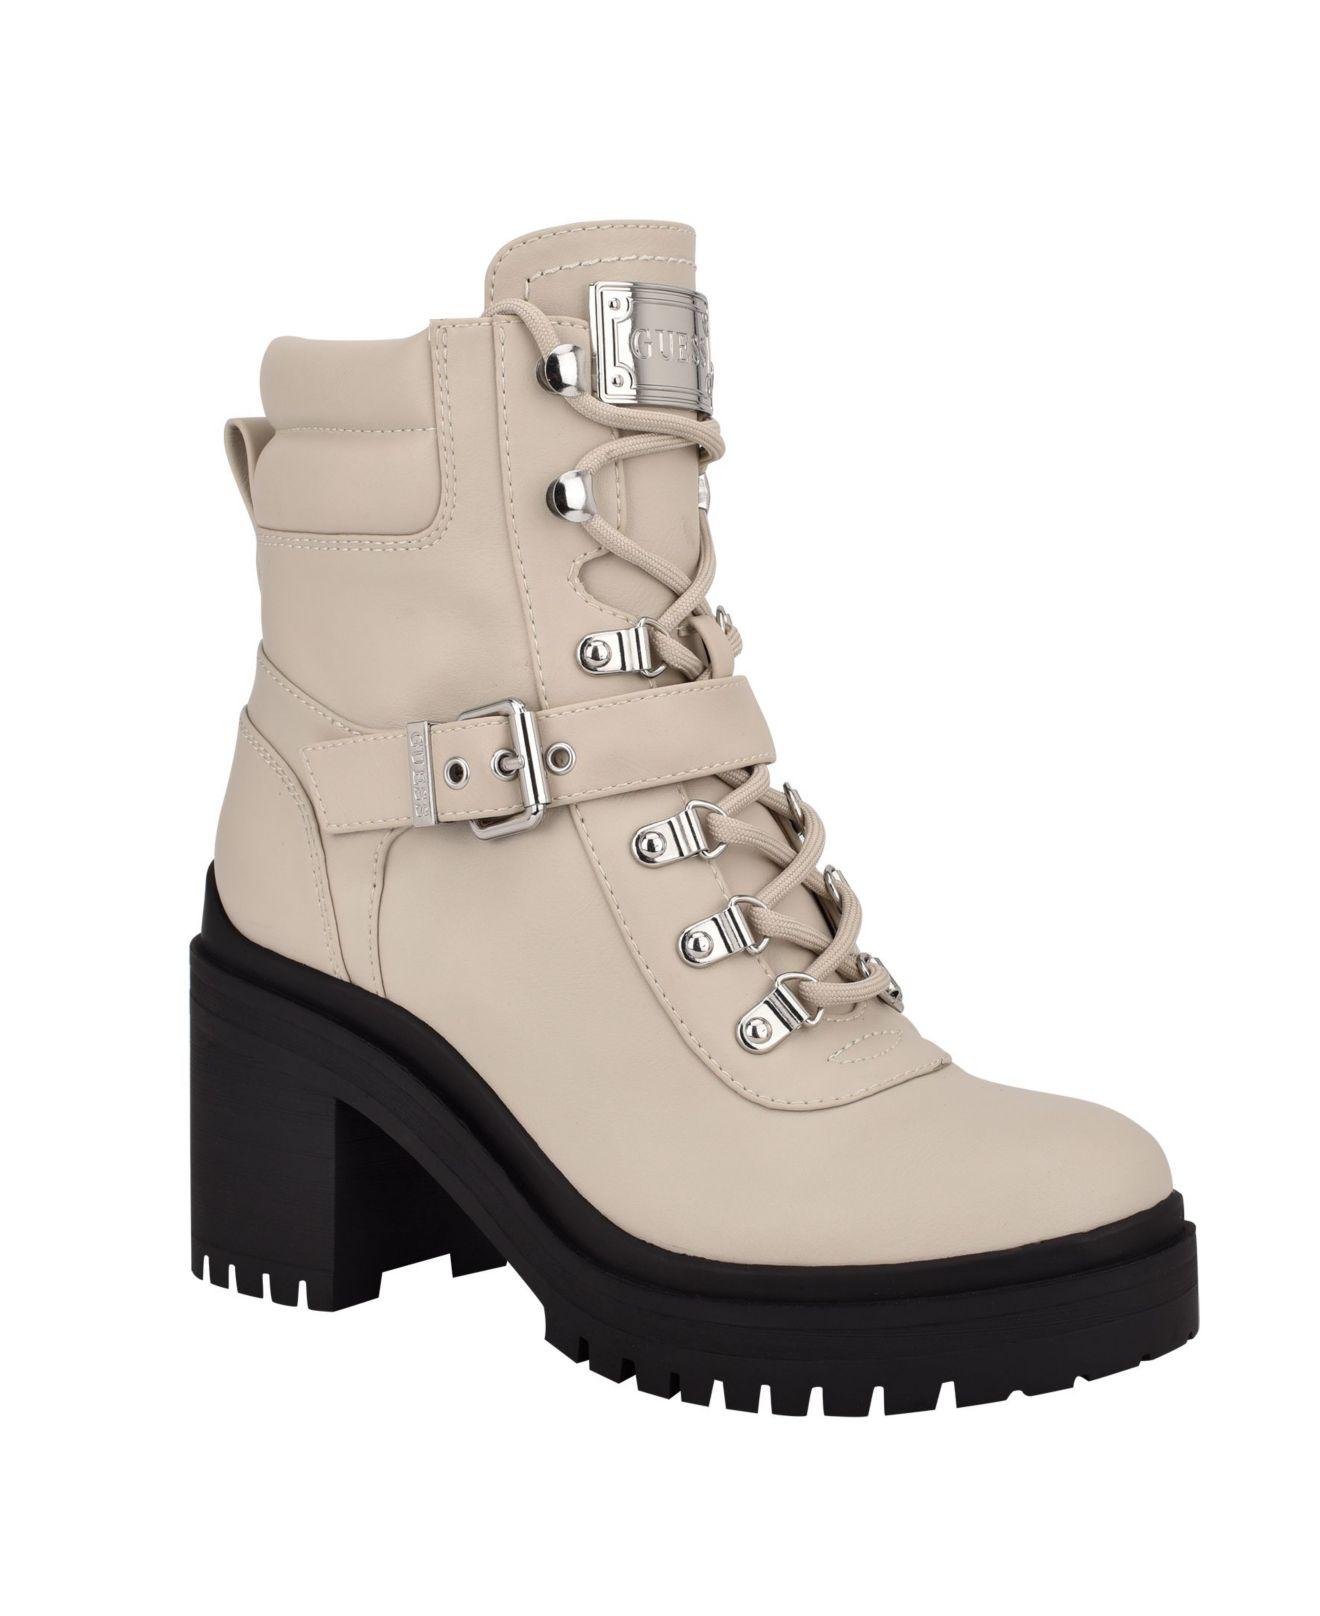 Guess Canaly Lug Sole Block Heel Combat Boots in White | Lyst